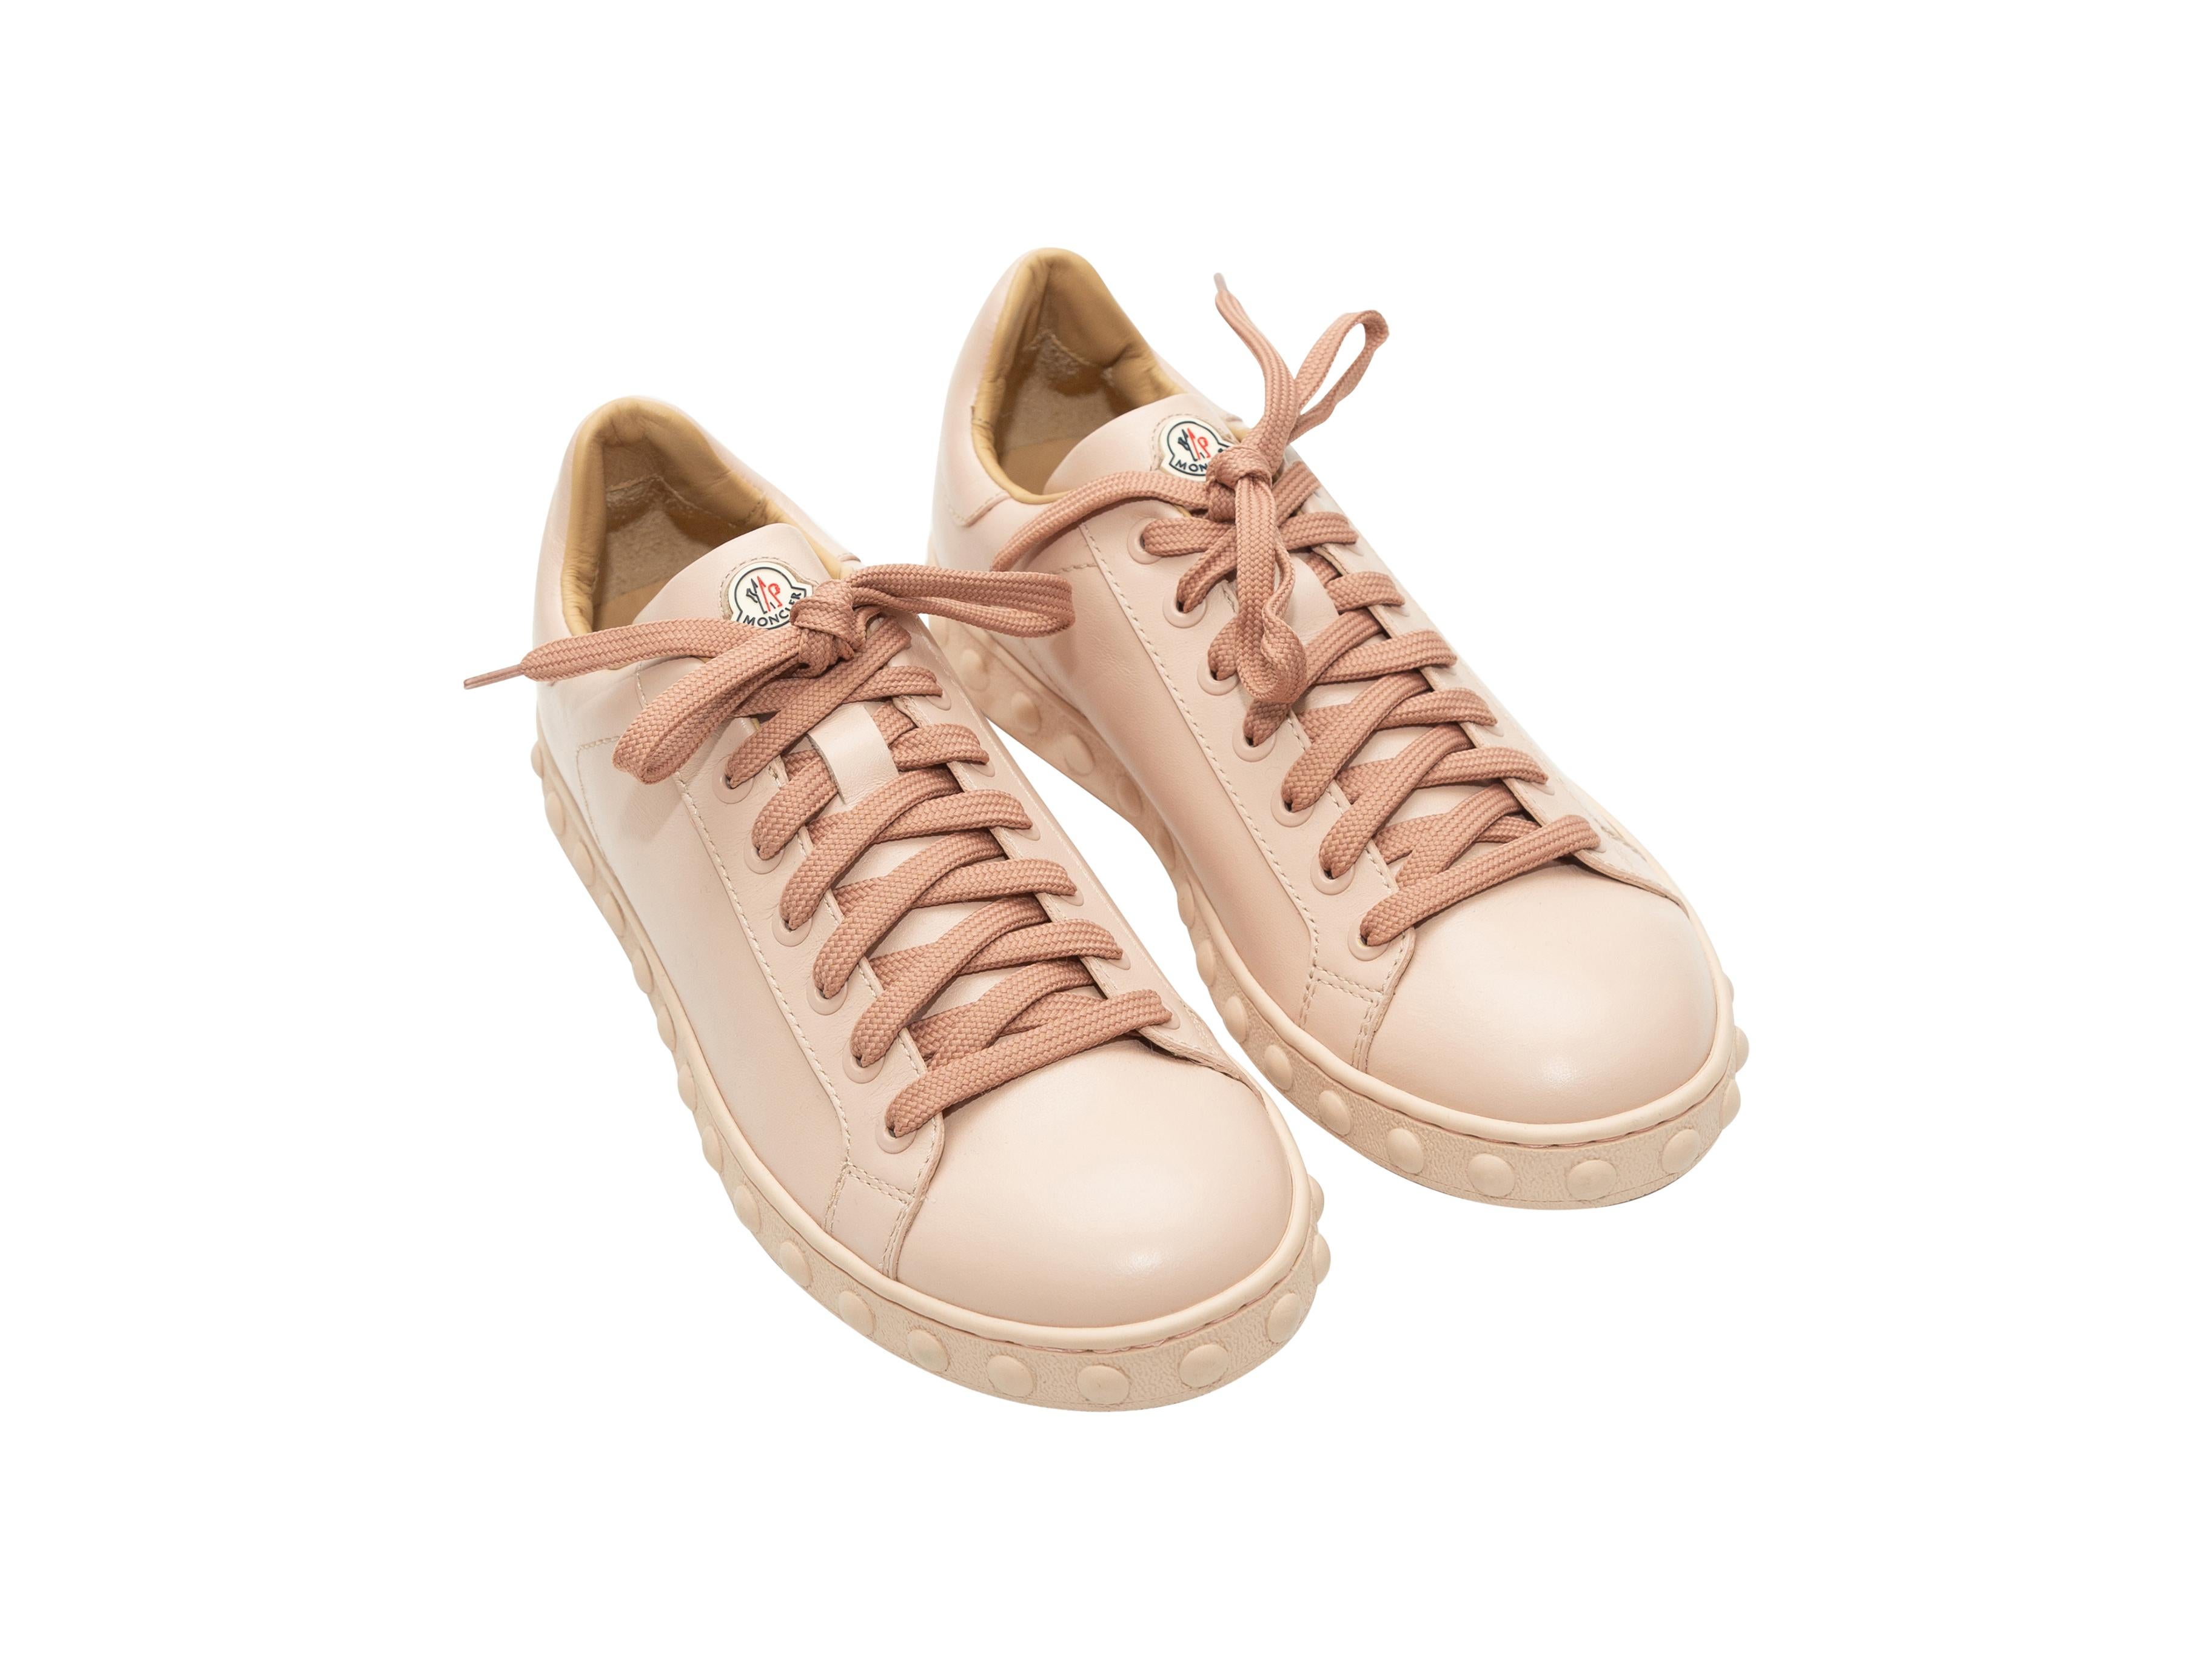 Product details: Light pink leather round-toe sneakers by Moncler. Stud embellishment trim at outer soles. Lace-up tie closures at tops. Designer size 37.
Condition: Pre-owned. Excellent.
Est. Retail $ 600.00